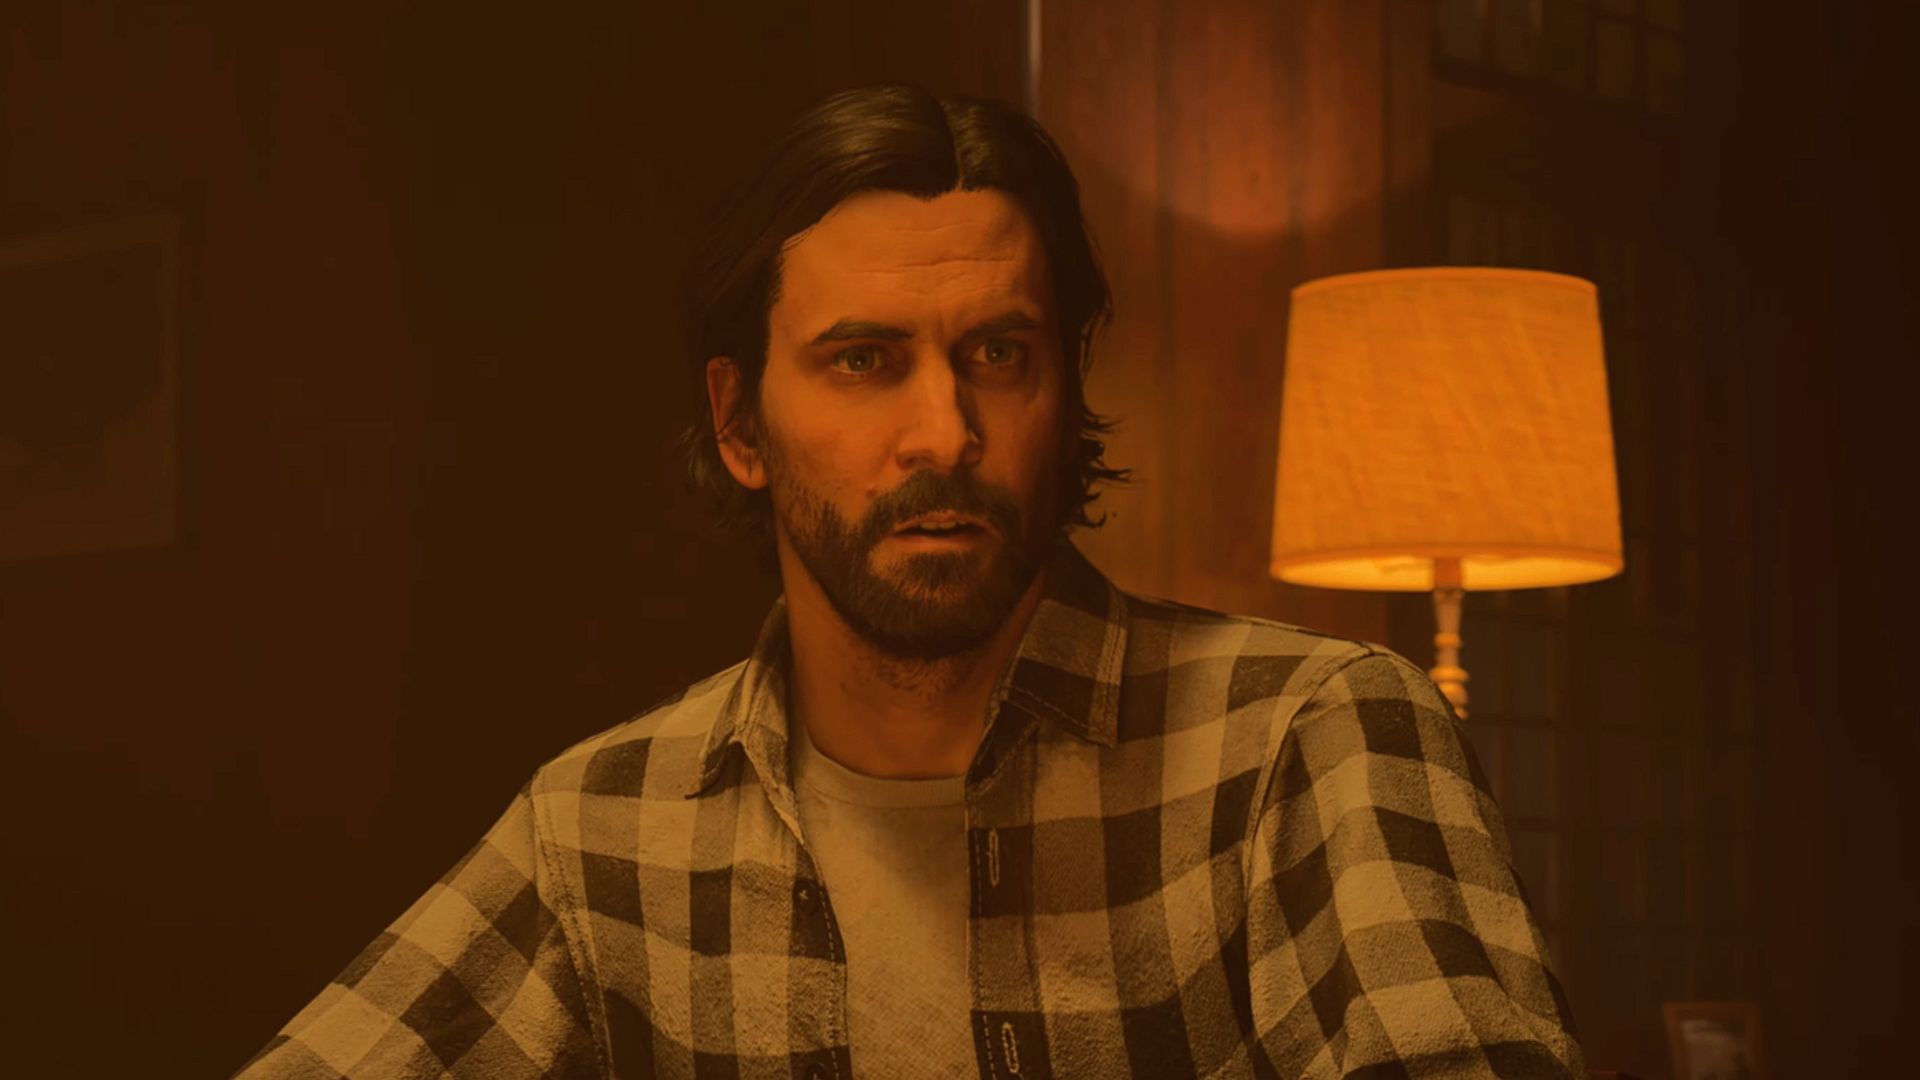 Why I'm Excited for Alan Wake 2